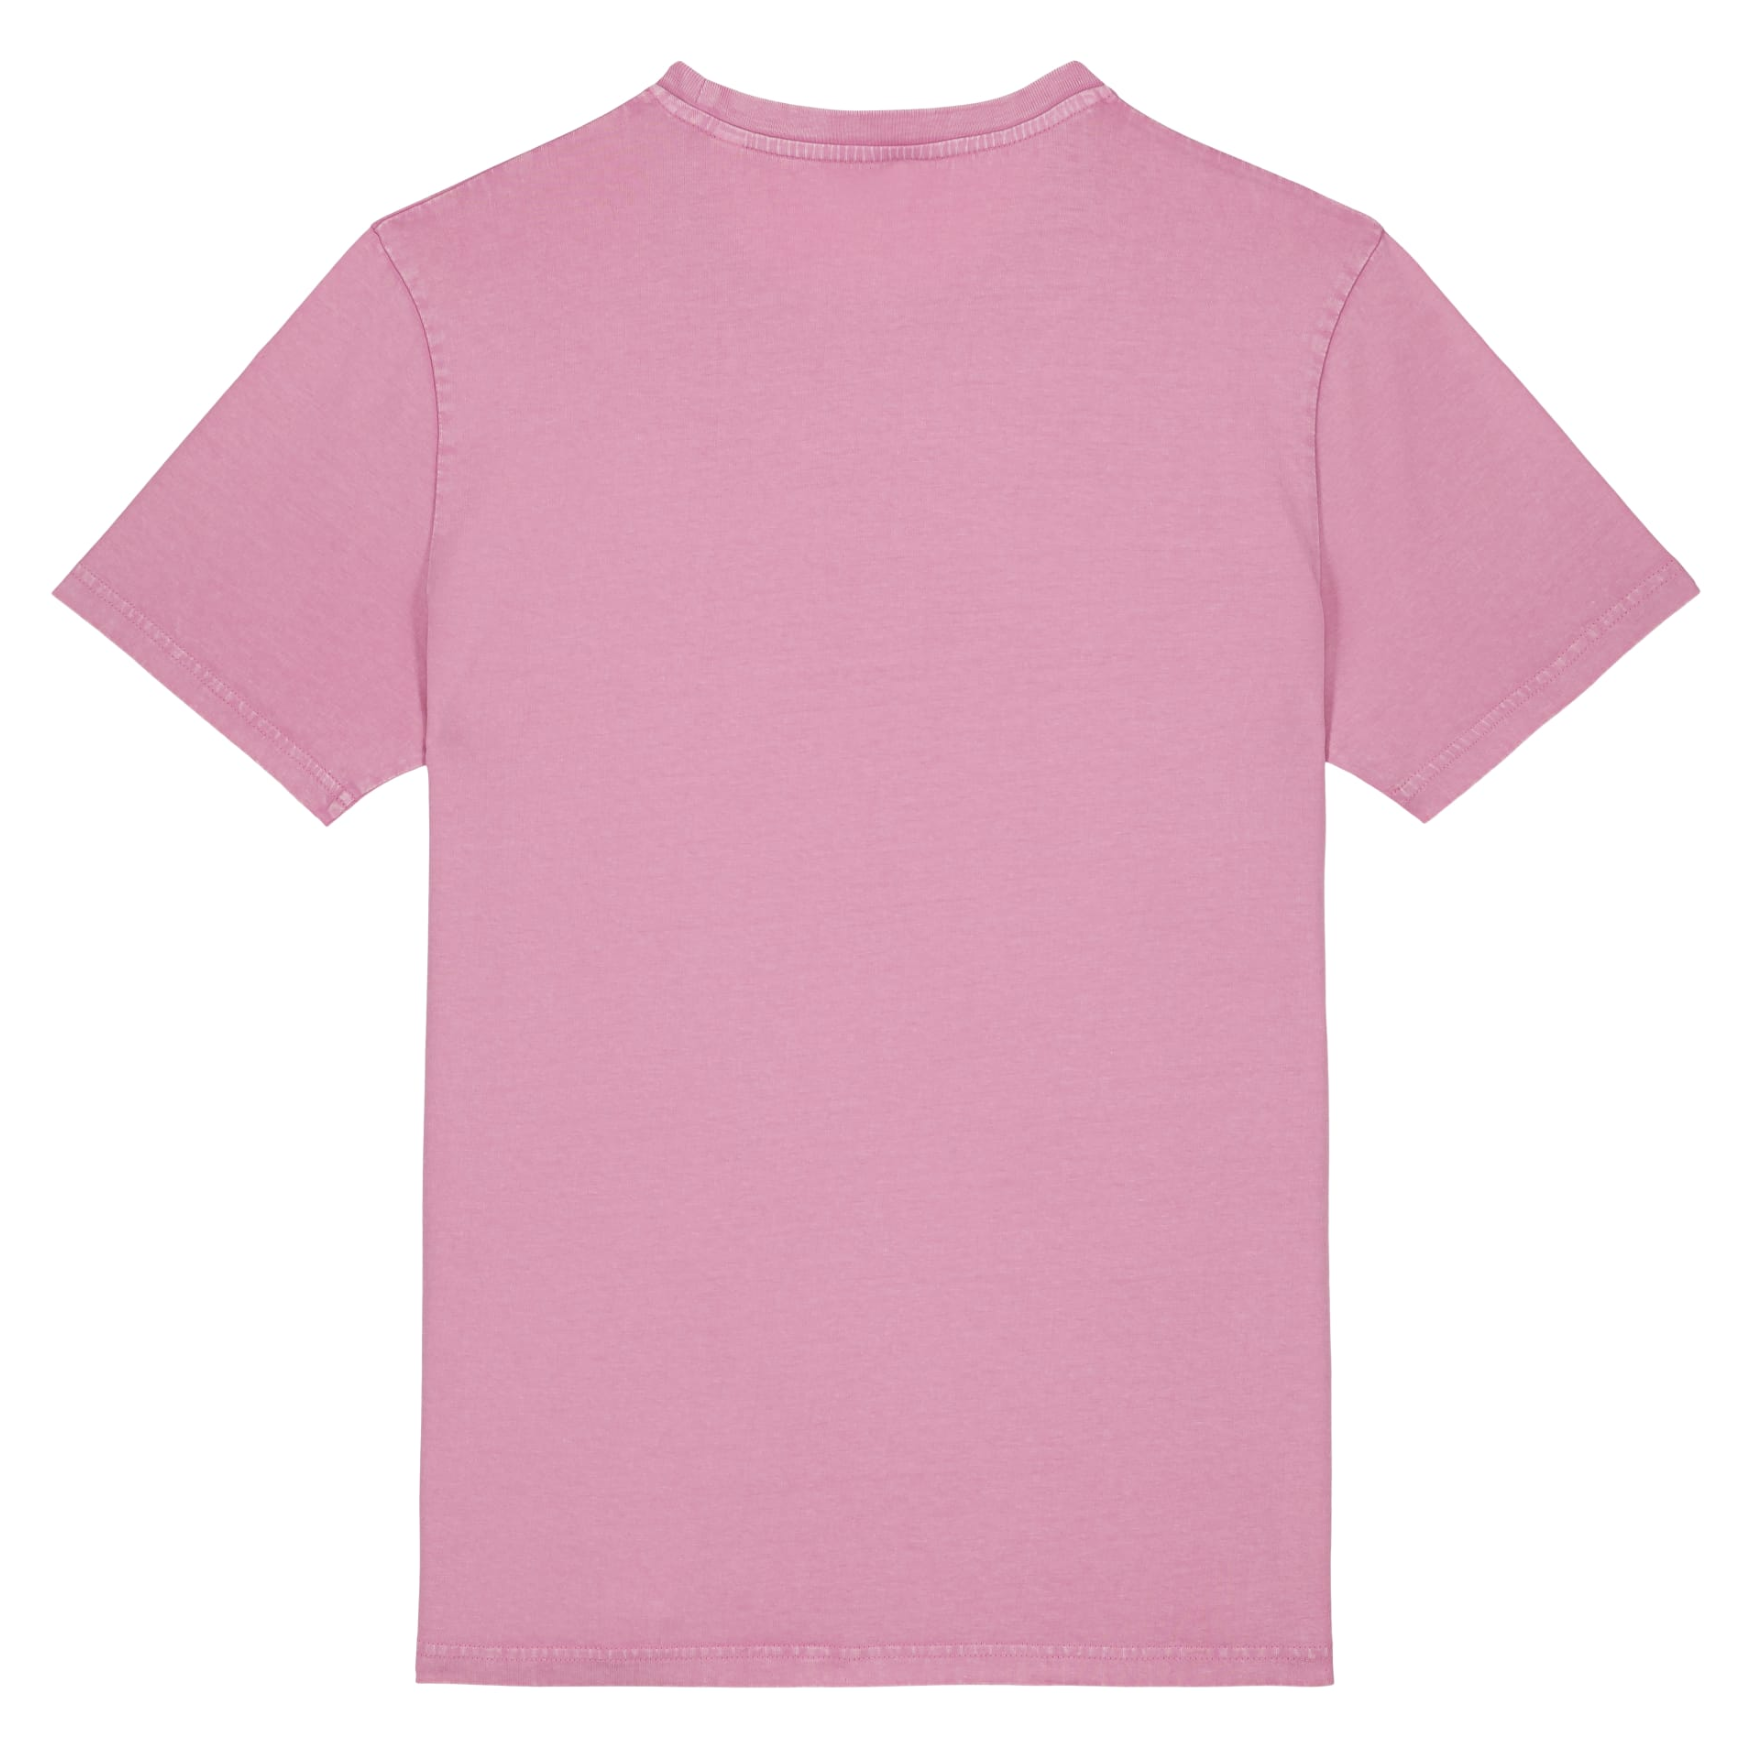 The back of a plain pink t-shirt